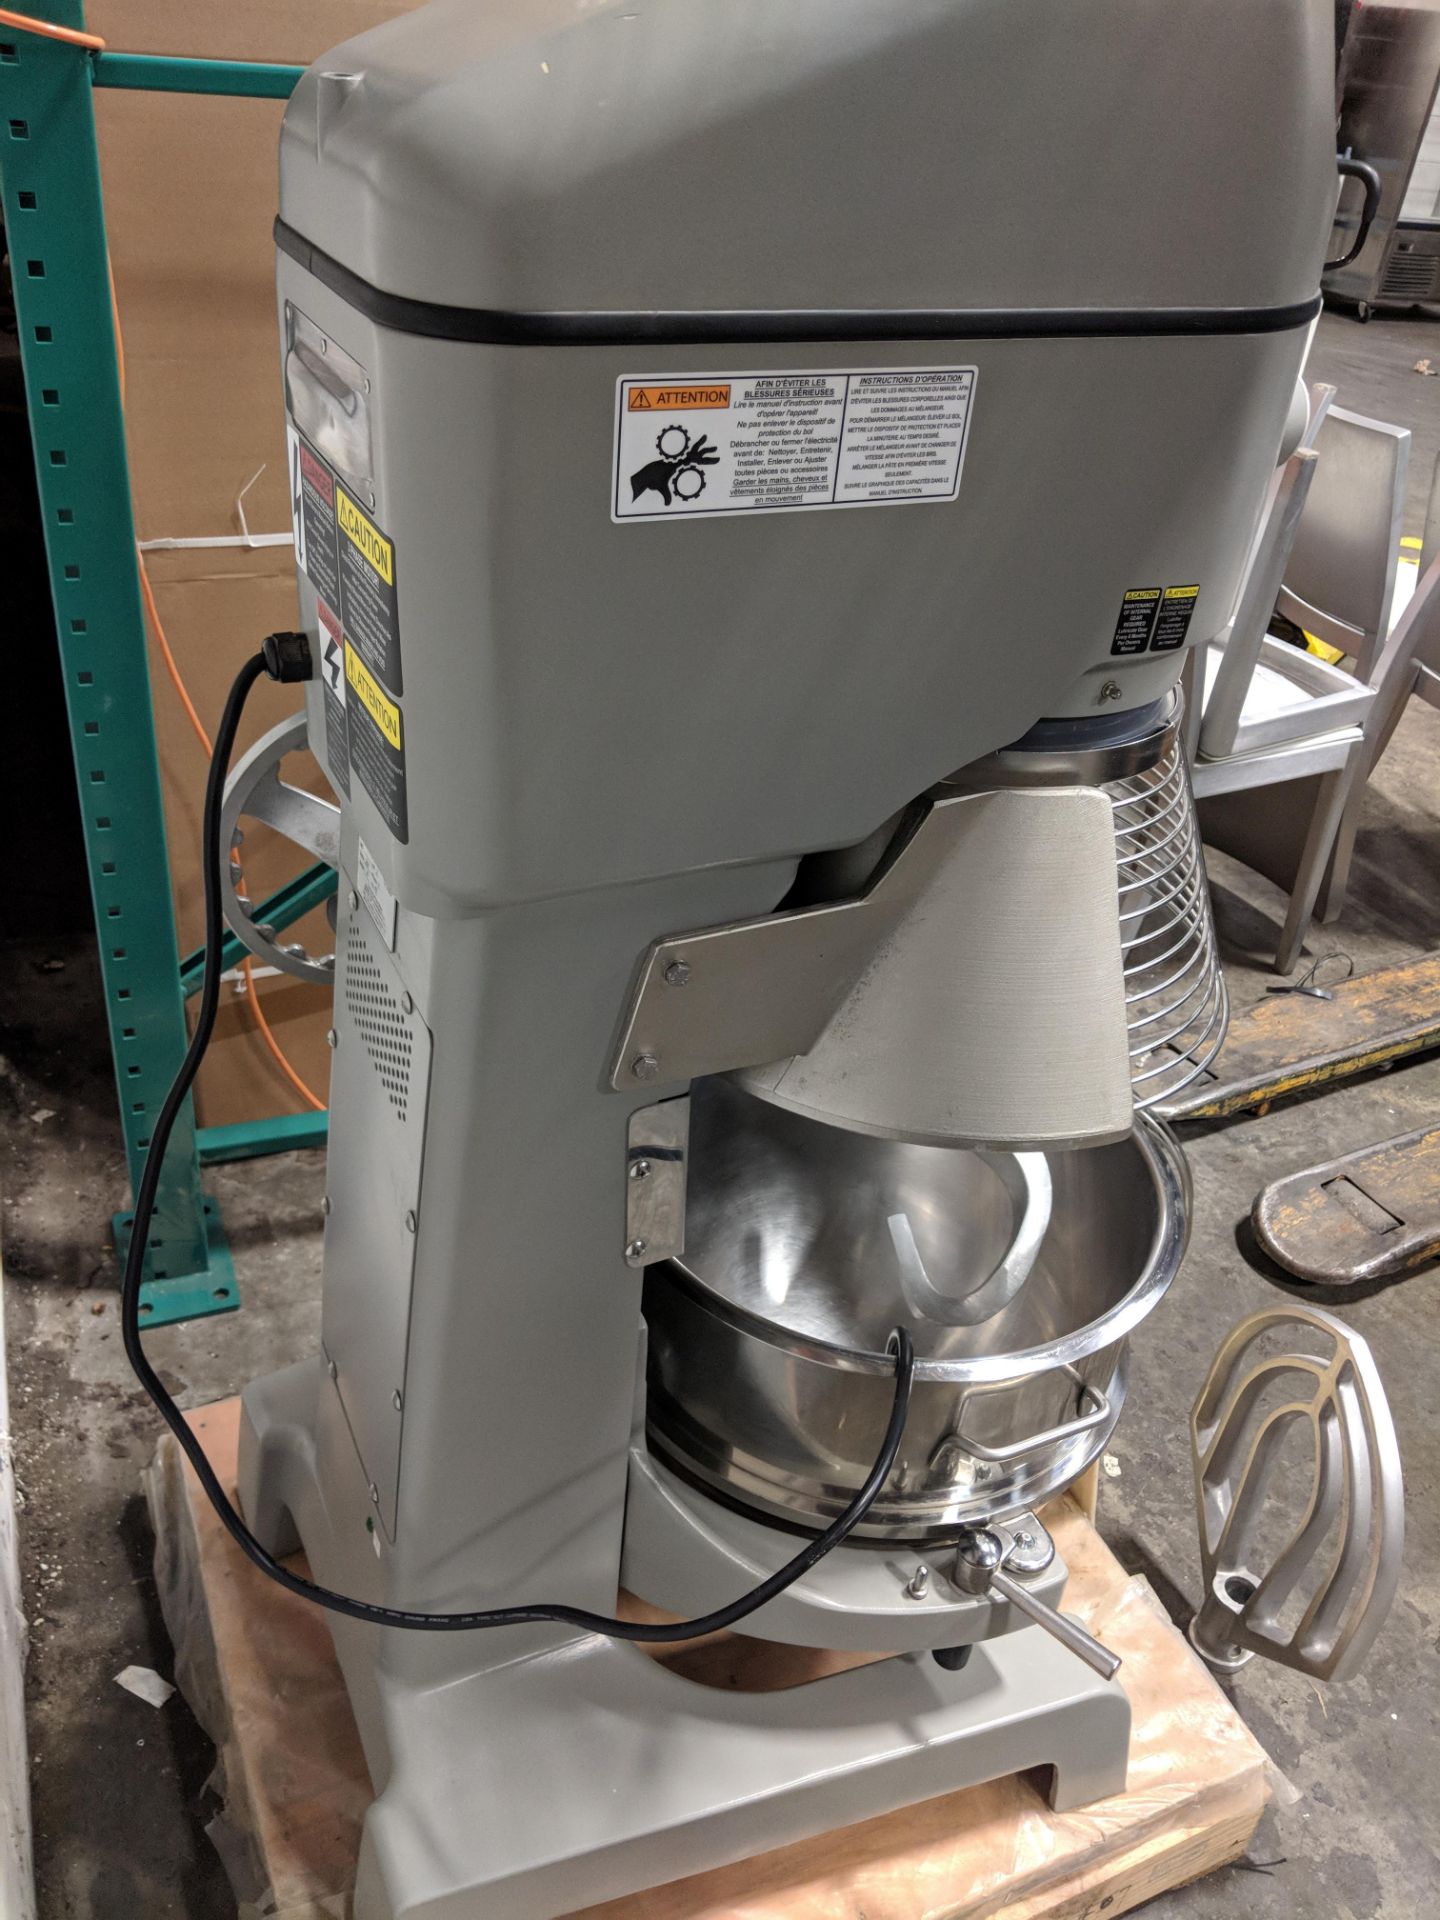 Globe 40qt Mixer with Hook, Whip, Paddle - Image 5 of 5